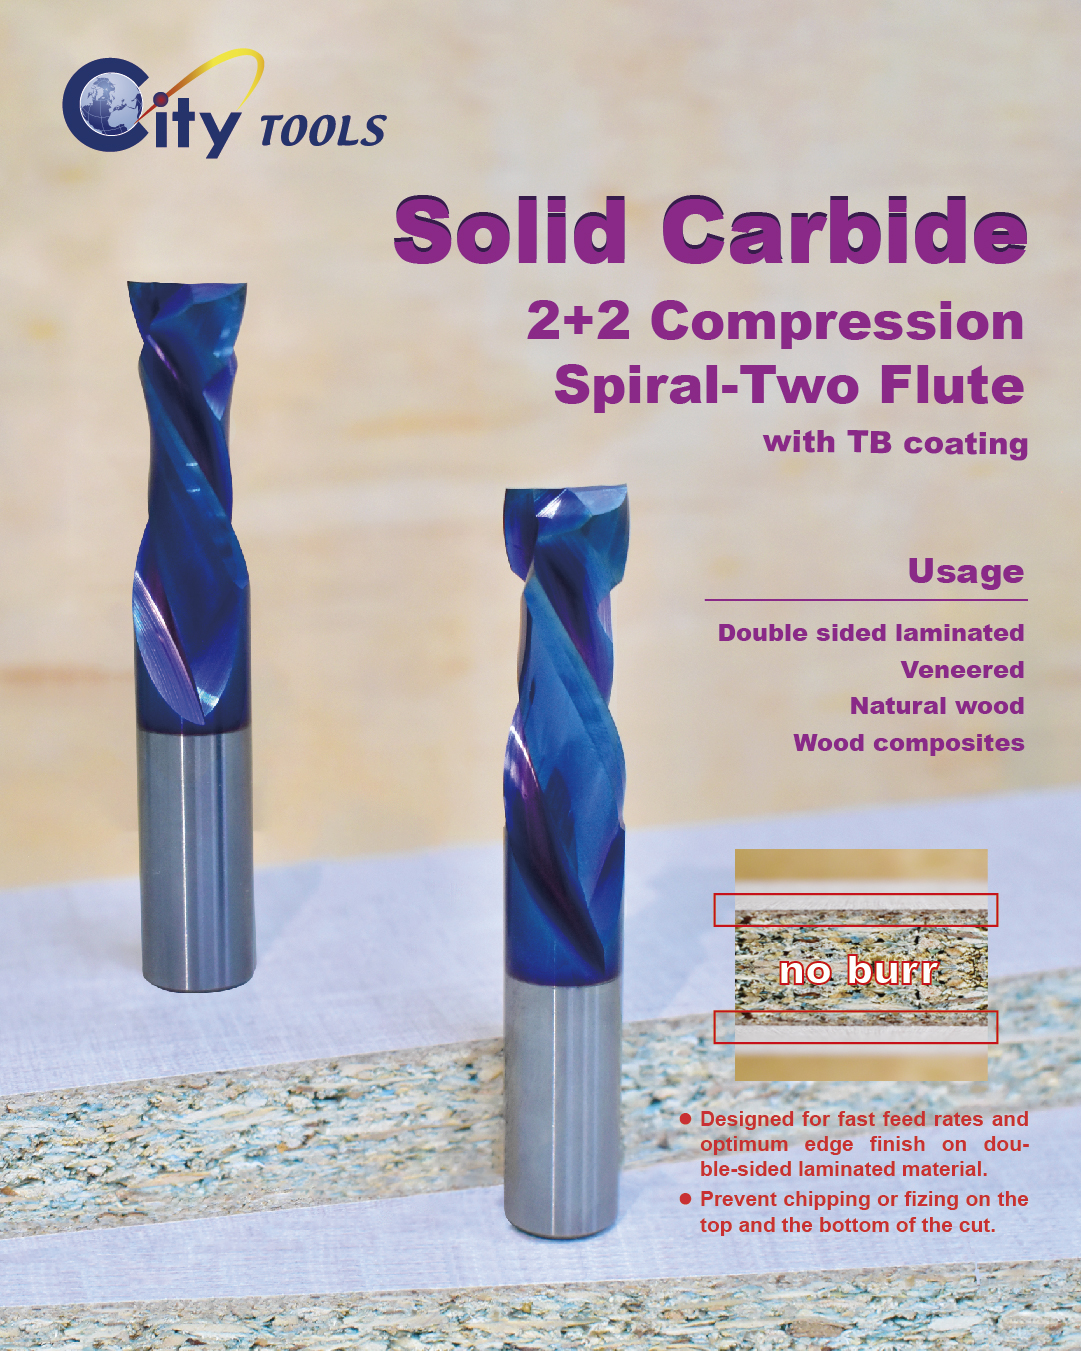 Solid Carbide Compression with 2 flute spiral and TB coating